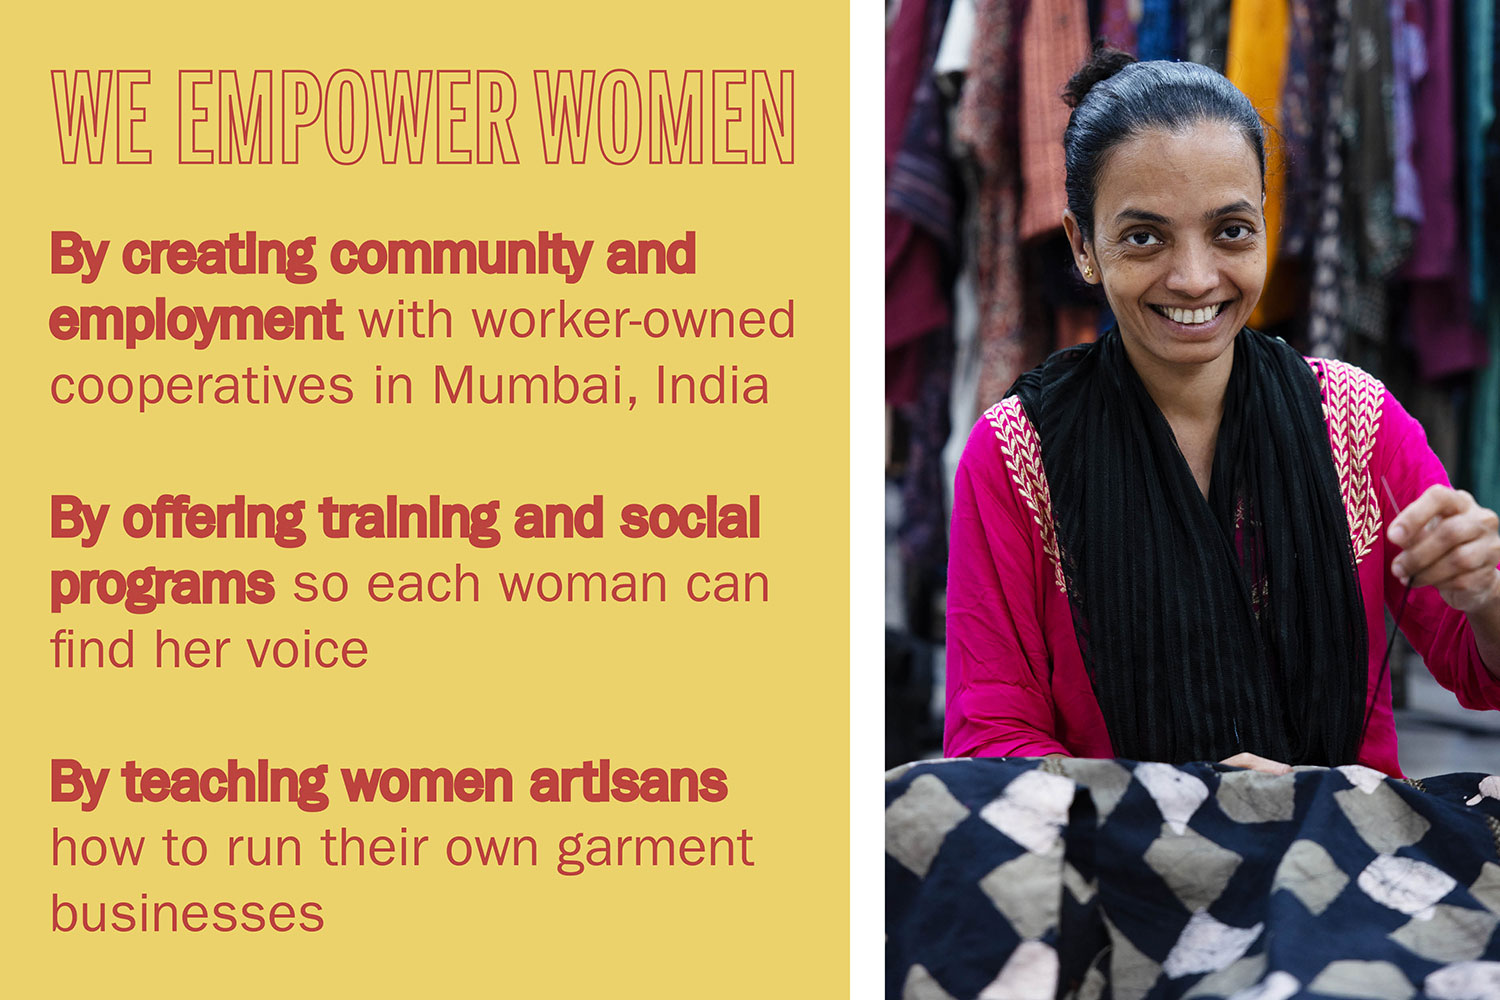 WE EMPOWER WOMEN By creating community and employment with worker-owned cooperatives in Mumbai, India By offering training and social programs so each woman can find her voice By teaching women artisans how to run their own garment businesses